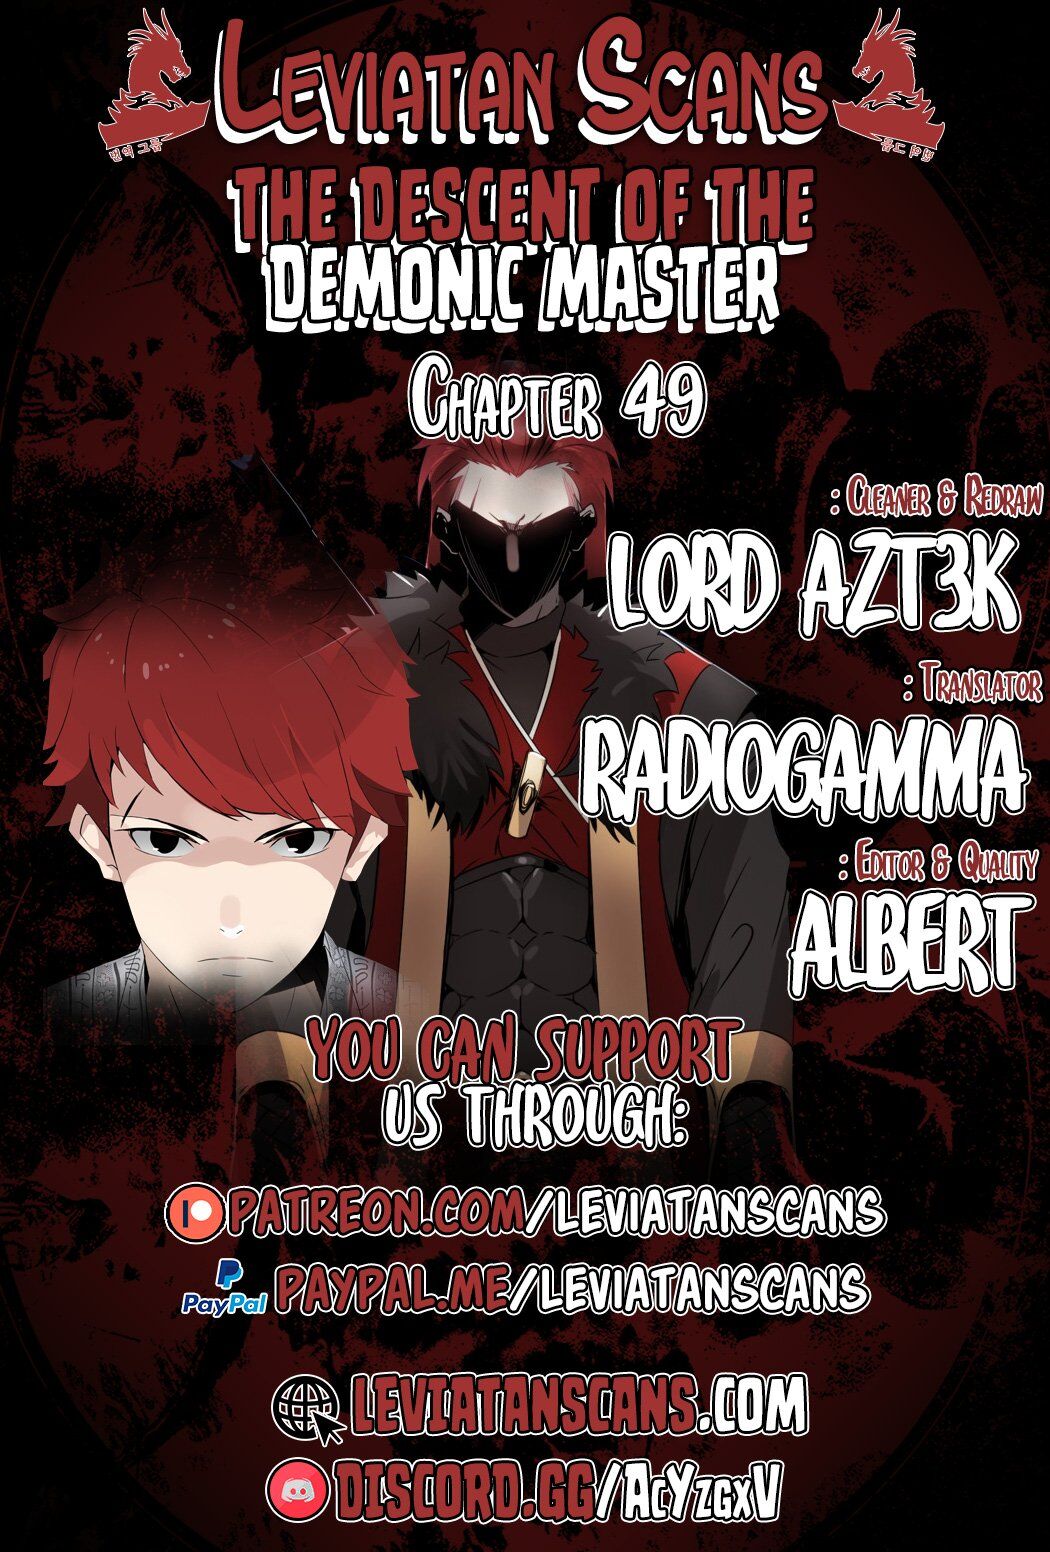 The Descent Of The Demonic Master Chapter 49